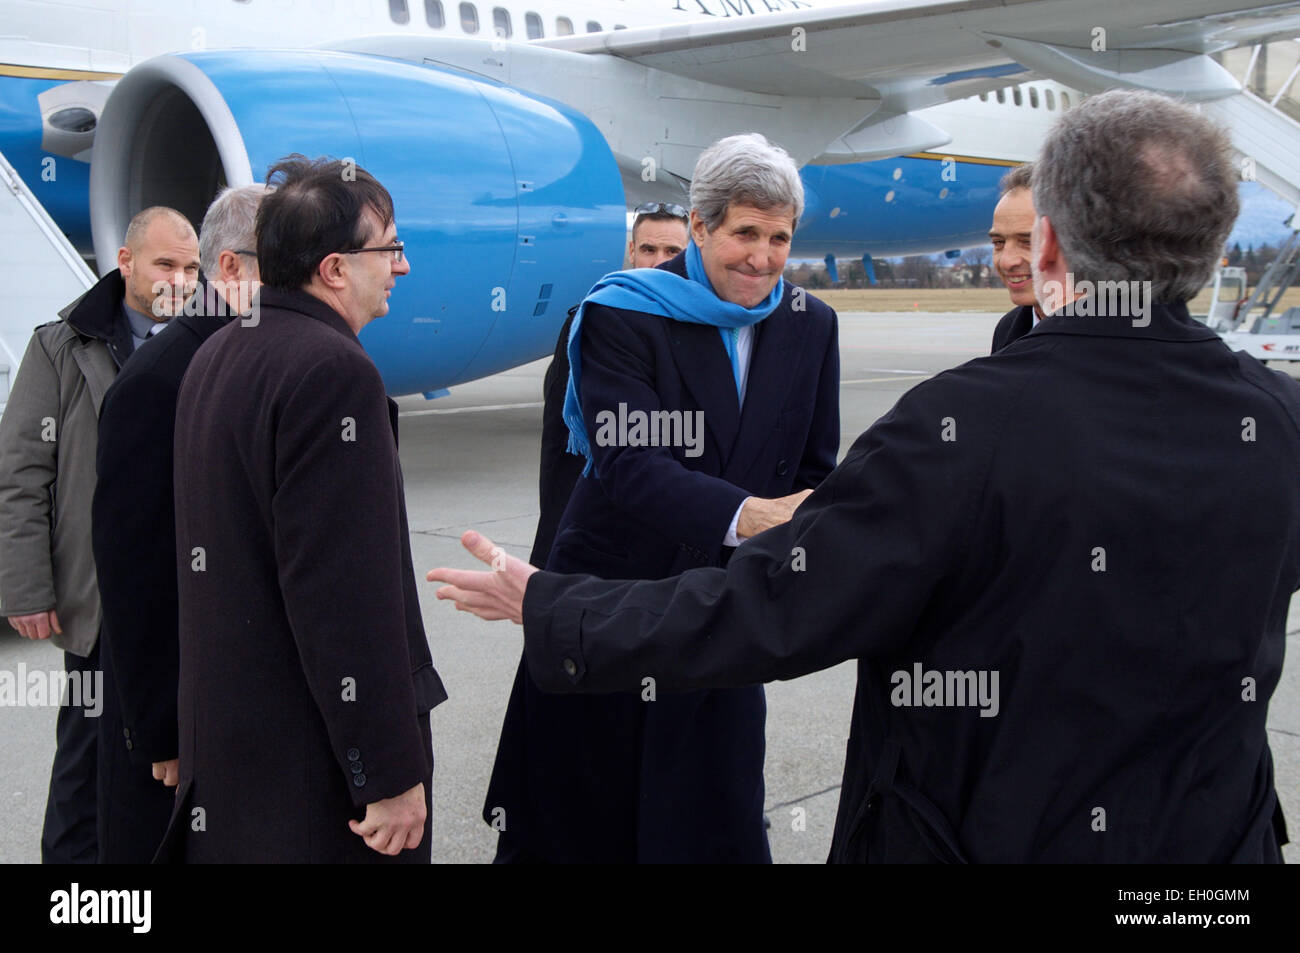 U.S. Secretary of State John Kerry shakes hands with Peter Mulrean, Deputy Chief of Mission for the United States Mission to the United Nations in Geneva, as he arrives in Geneva, Switzerland, on February 22, 2015, for a round of talks with Iranian officials about the future of their nuclear program. Stock Photo